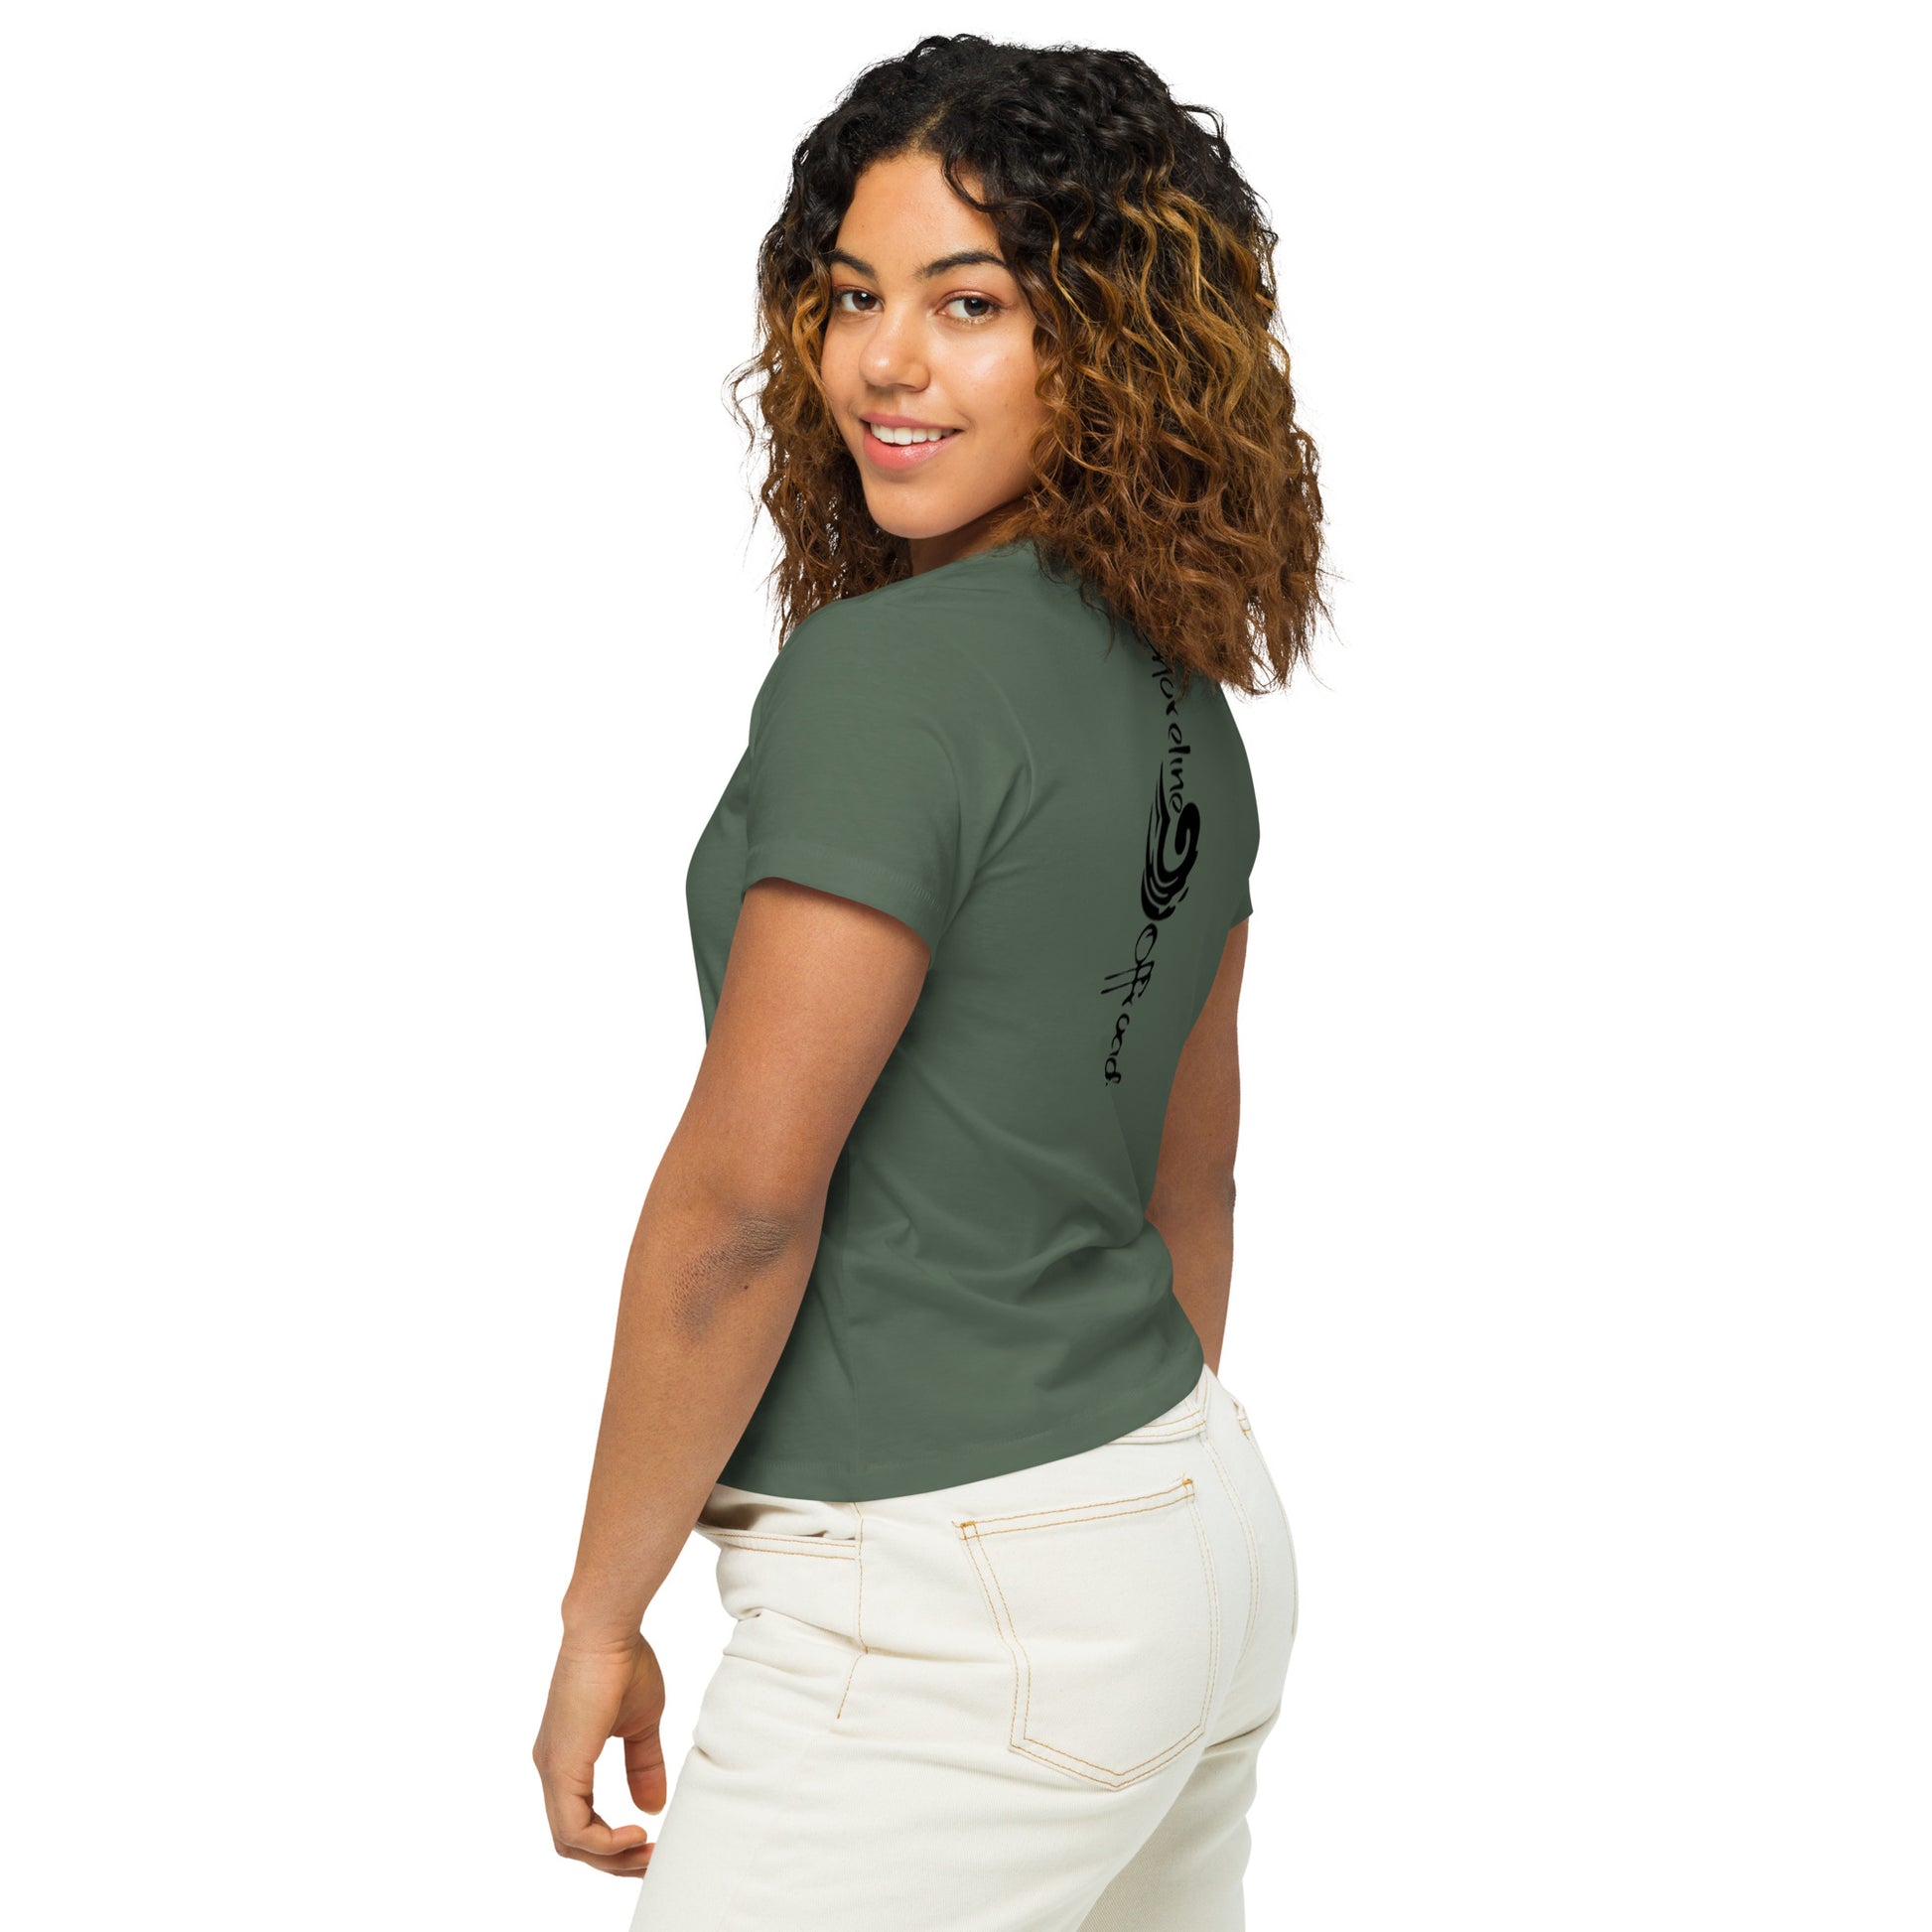 a woman wearing a green shirt and white pants